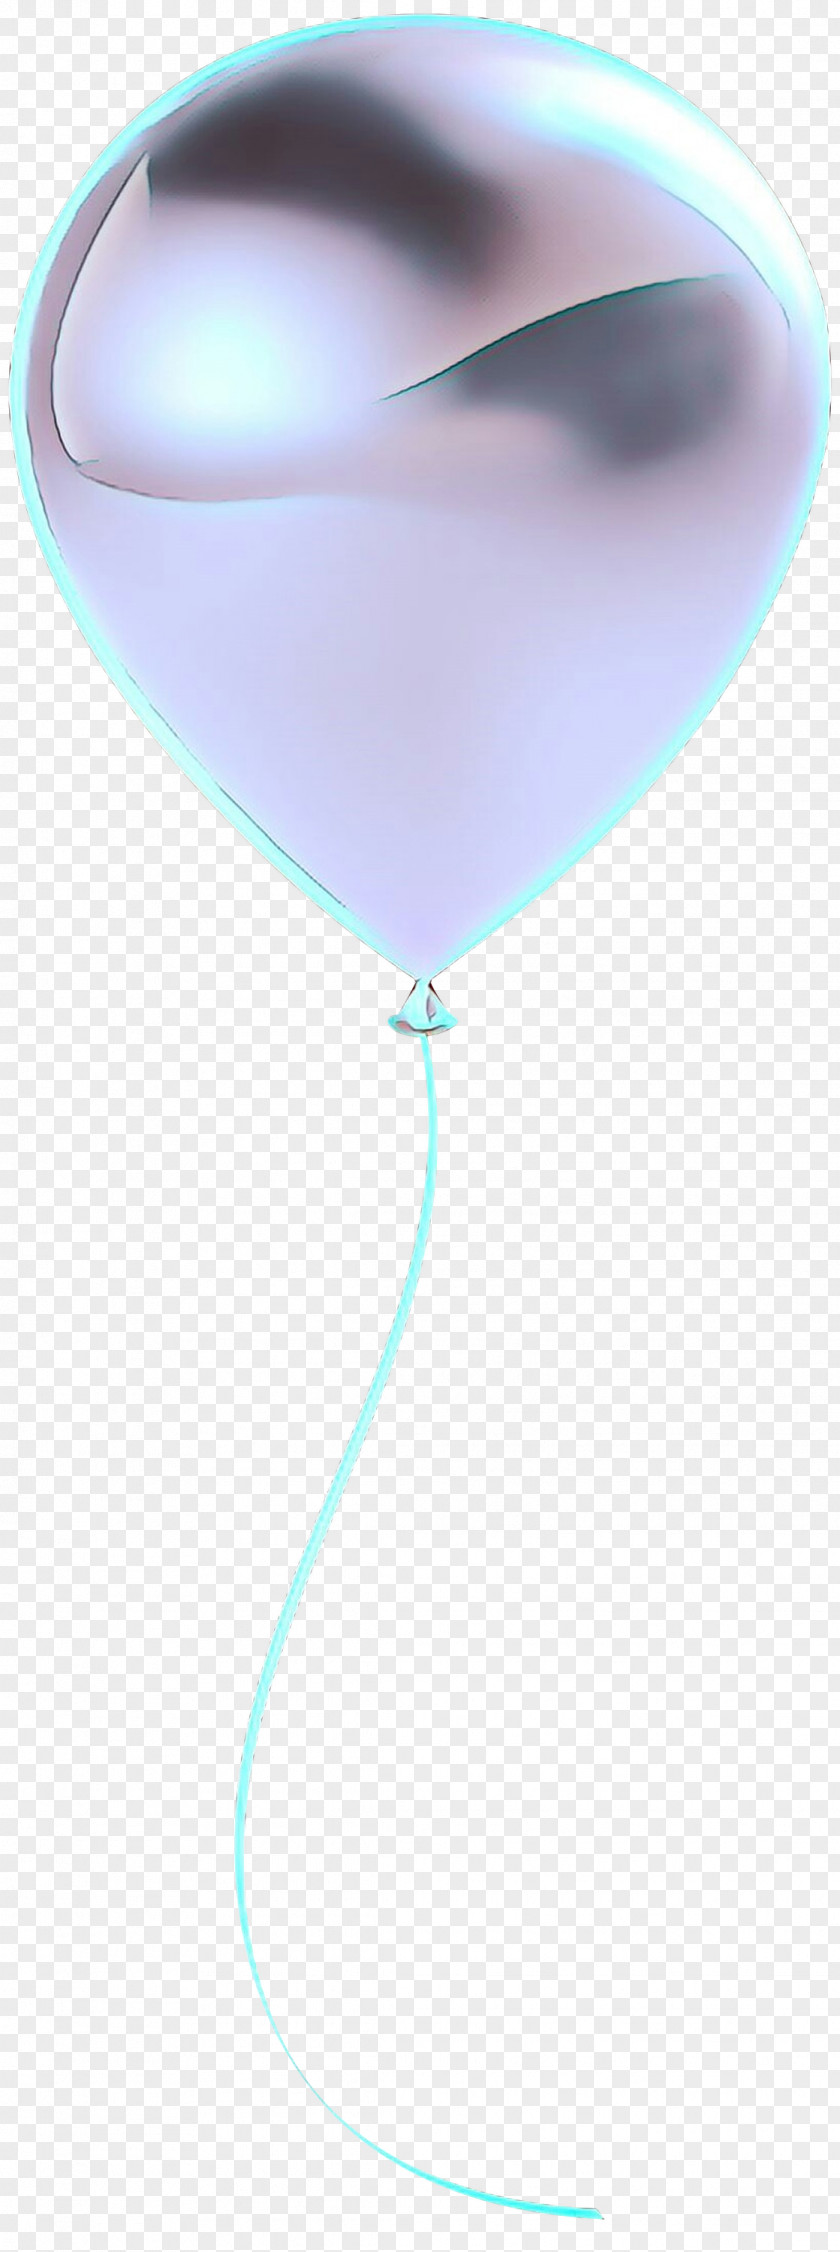 Fashion Accessory Party Supply Balloon Turquoise Blue Aqua PNG